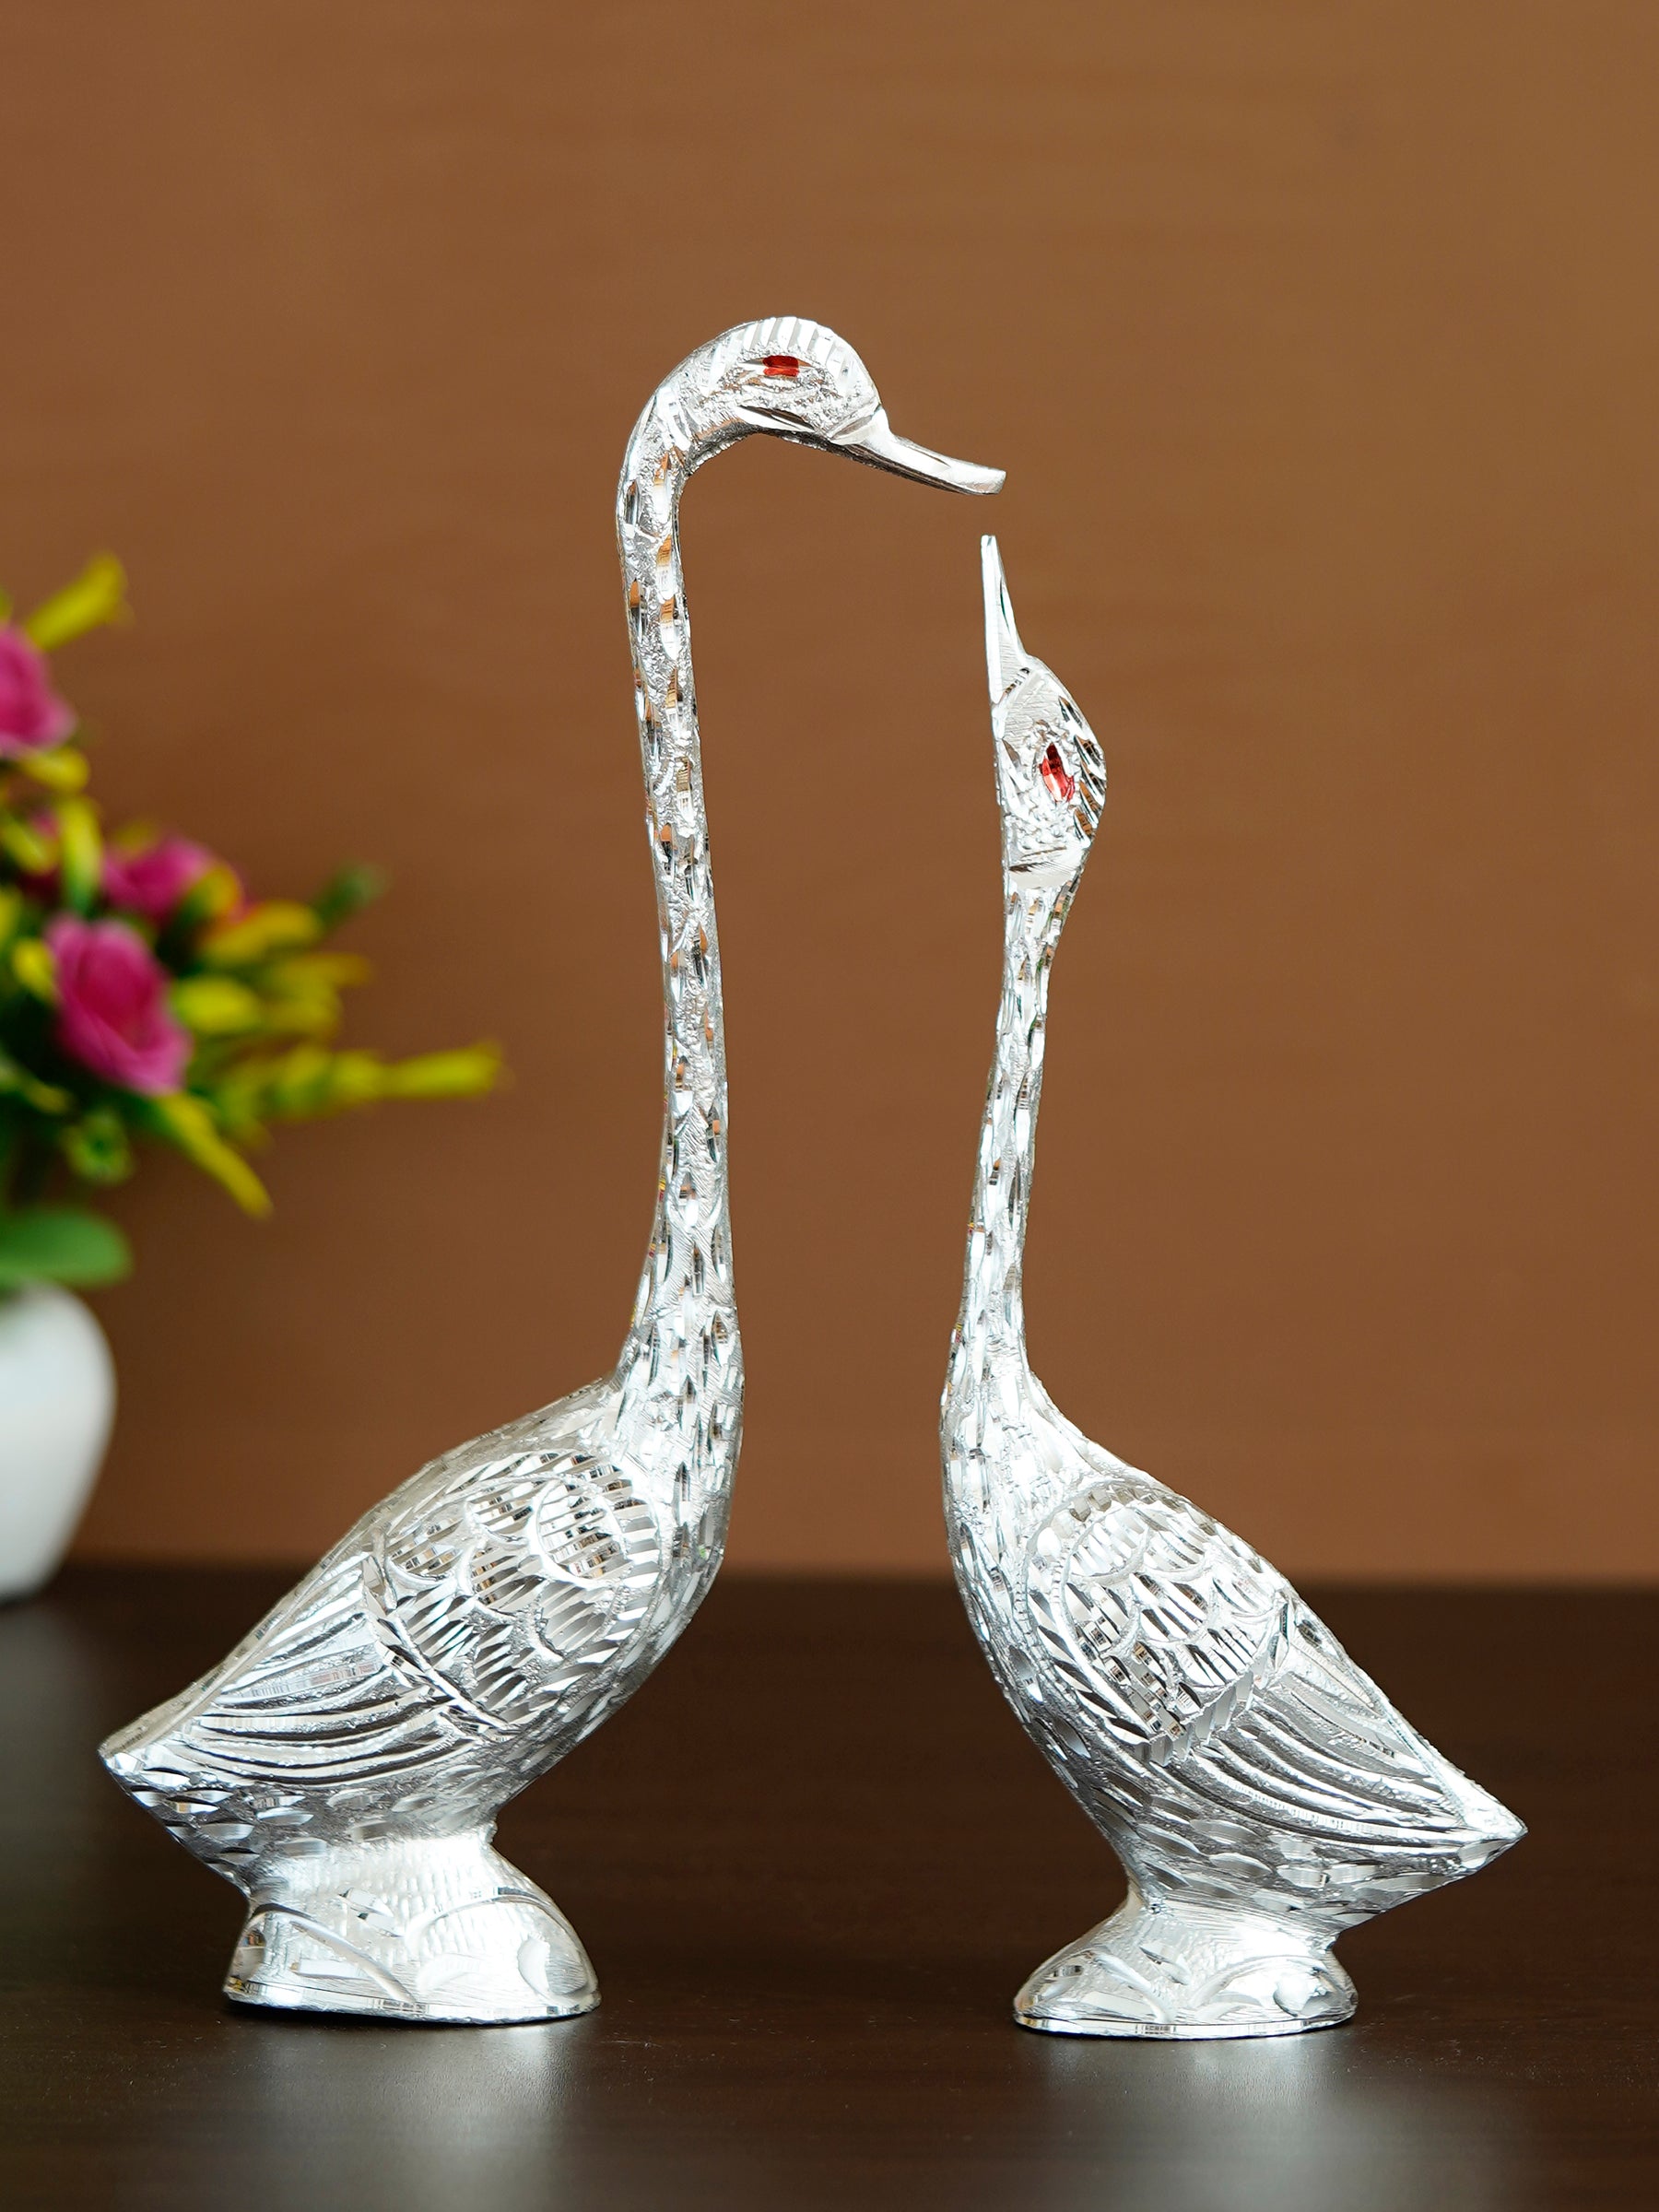 Silver Metal Kissing Swan Couple Handcrafted Decorative Figurine